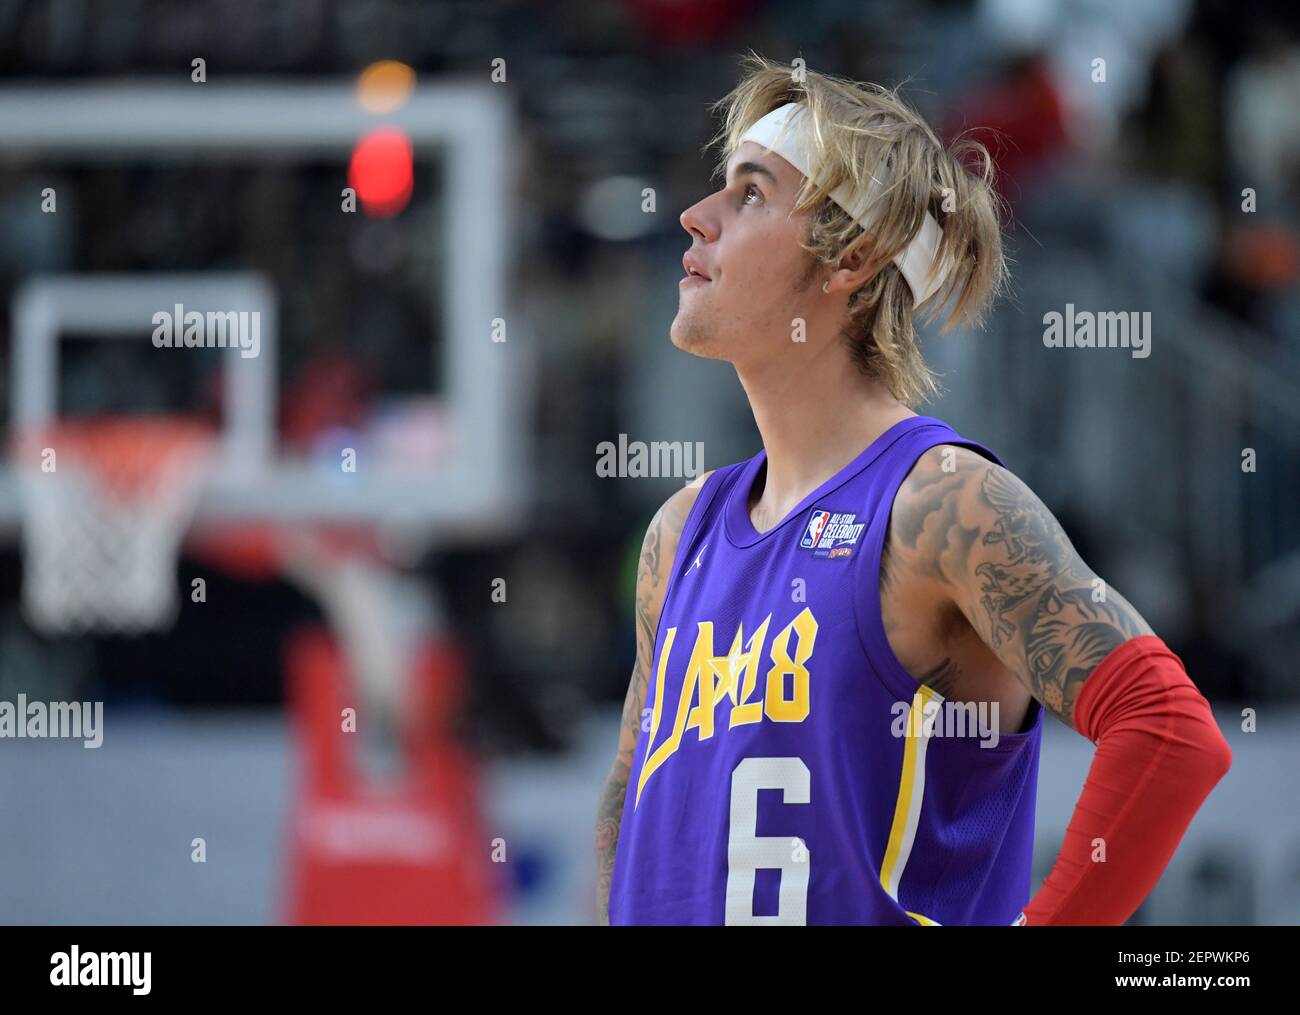 Feb 16, 2018; Los Angeles, CA, USA; Recording artist Justin Bieber during  the NBA All-Star Celebrity Game at the Los Angeles Convention Center.  Mandatory Credit: Kirby Lee-USA TODAY Sports Stock Photo -